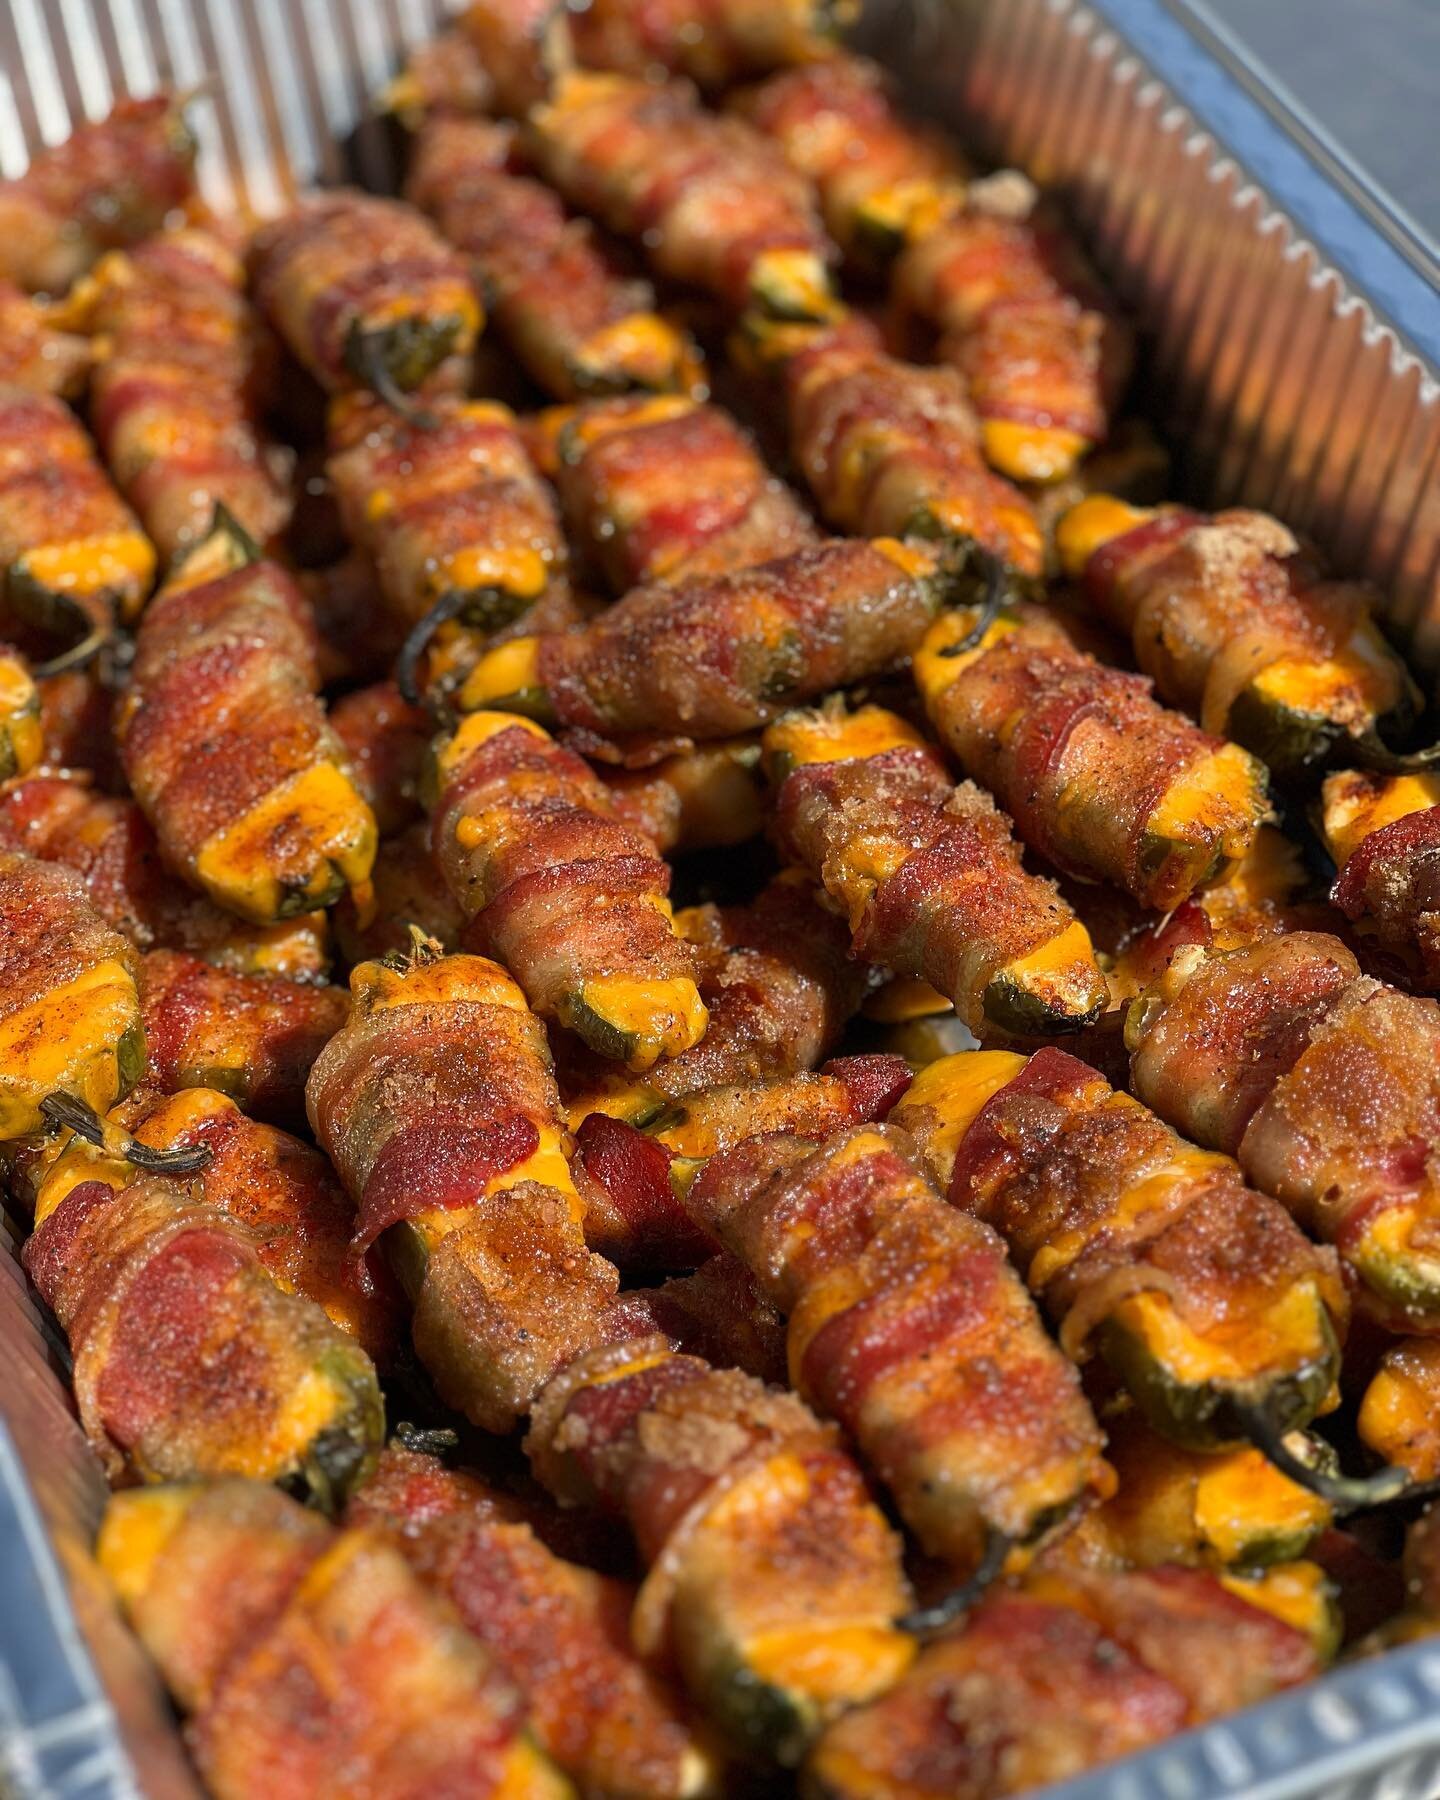 ABT&rsquo;s (atomic buffalo turds) or Jalape&ntilde;o poppers, call them what you&rsquo;d like. I&rsquo;ll call them delicious!